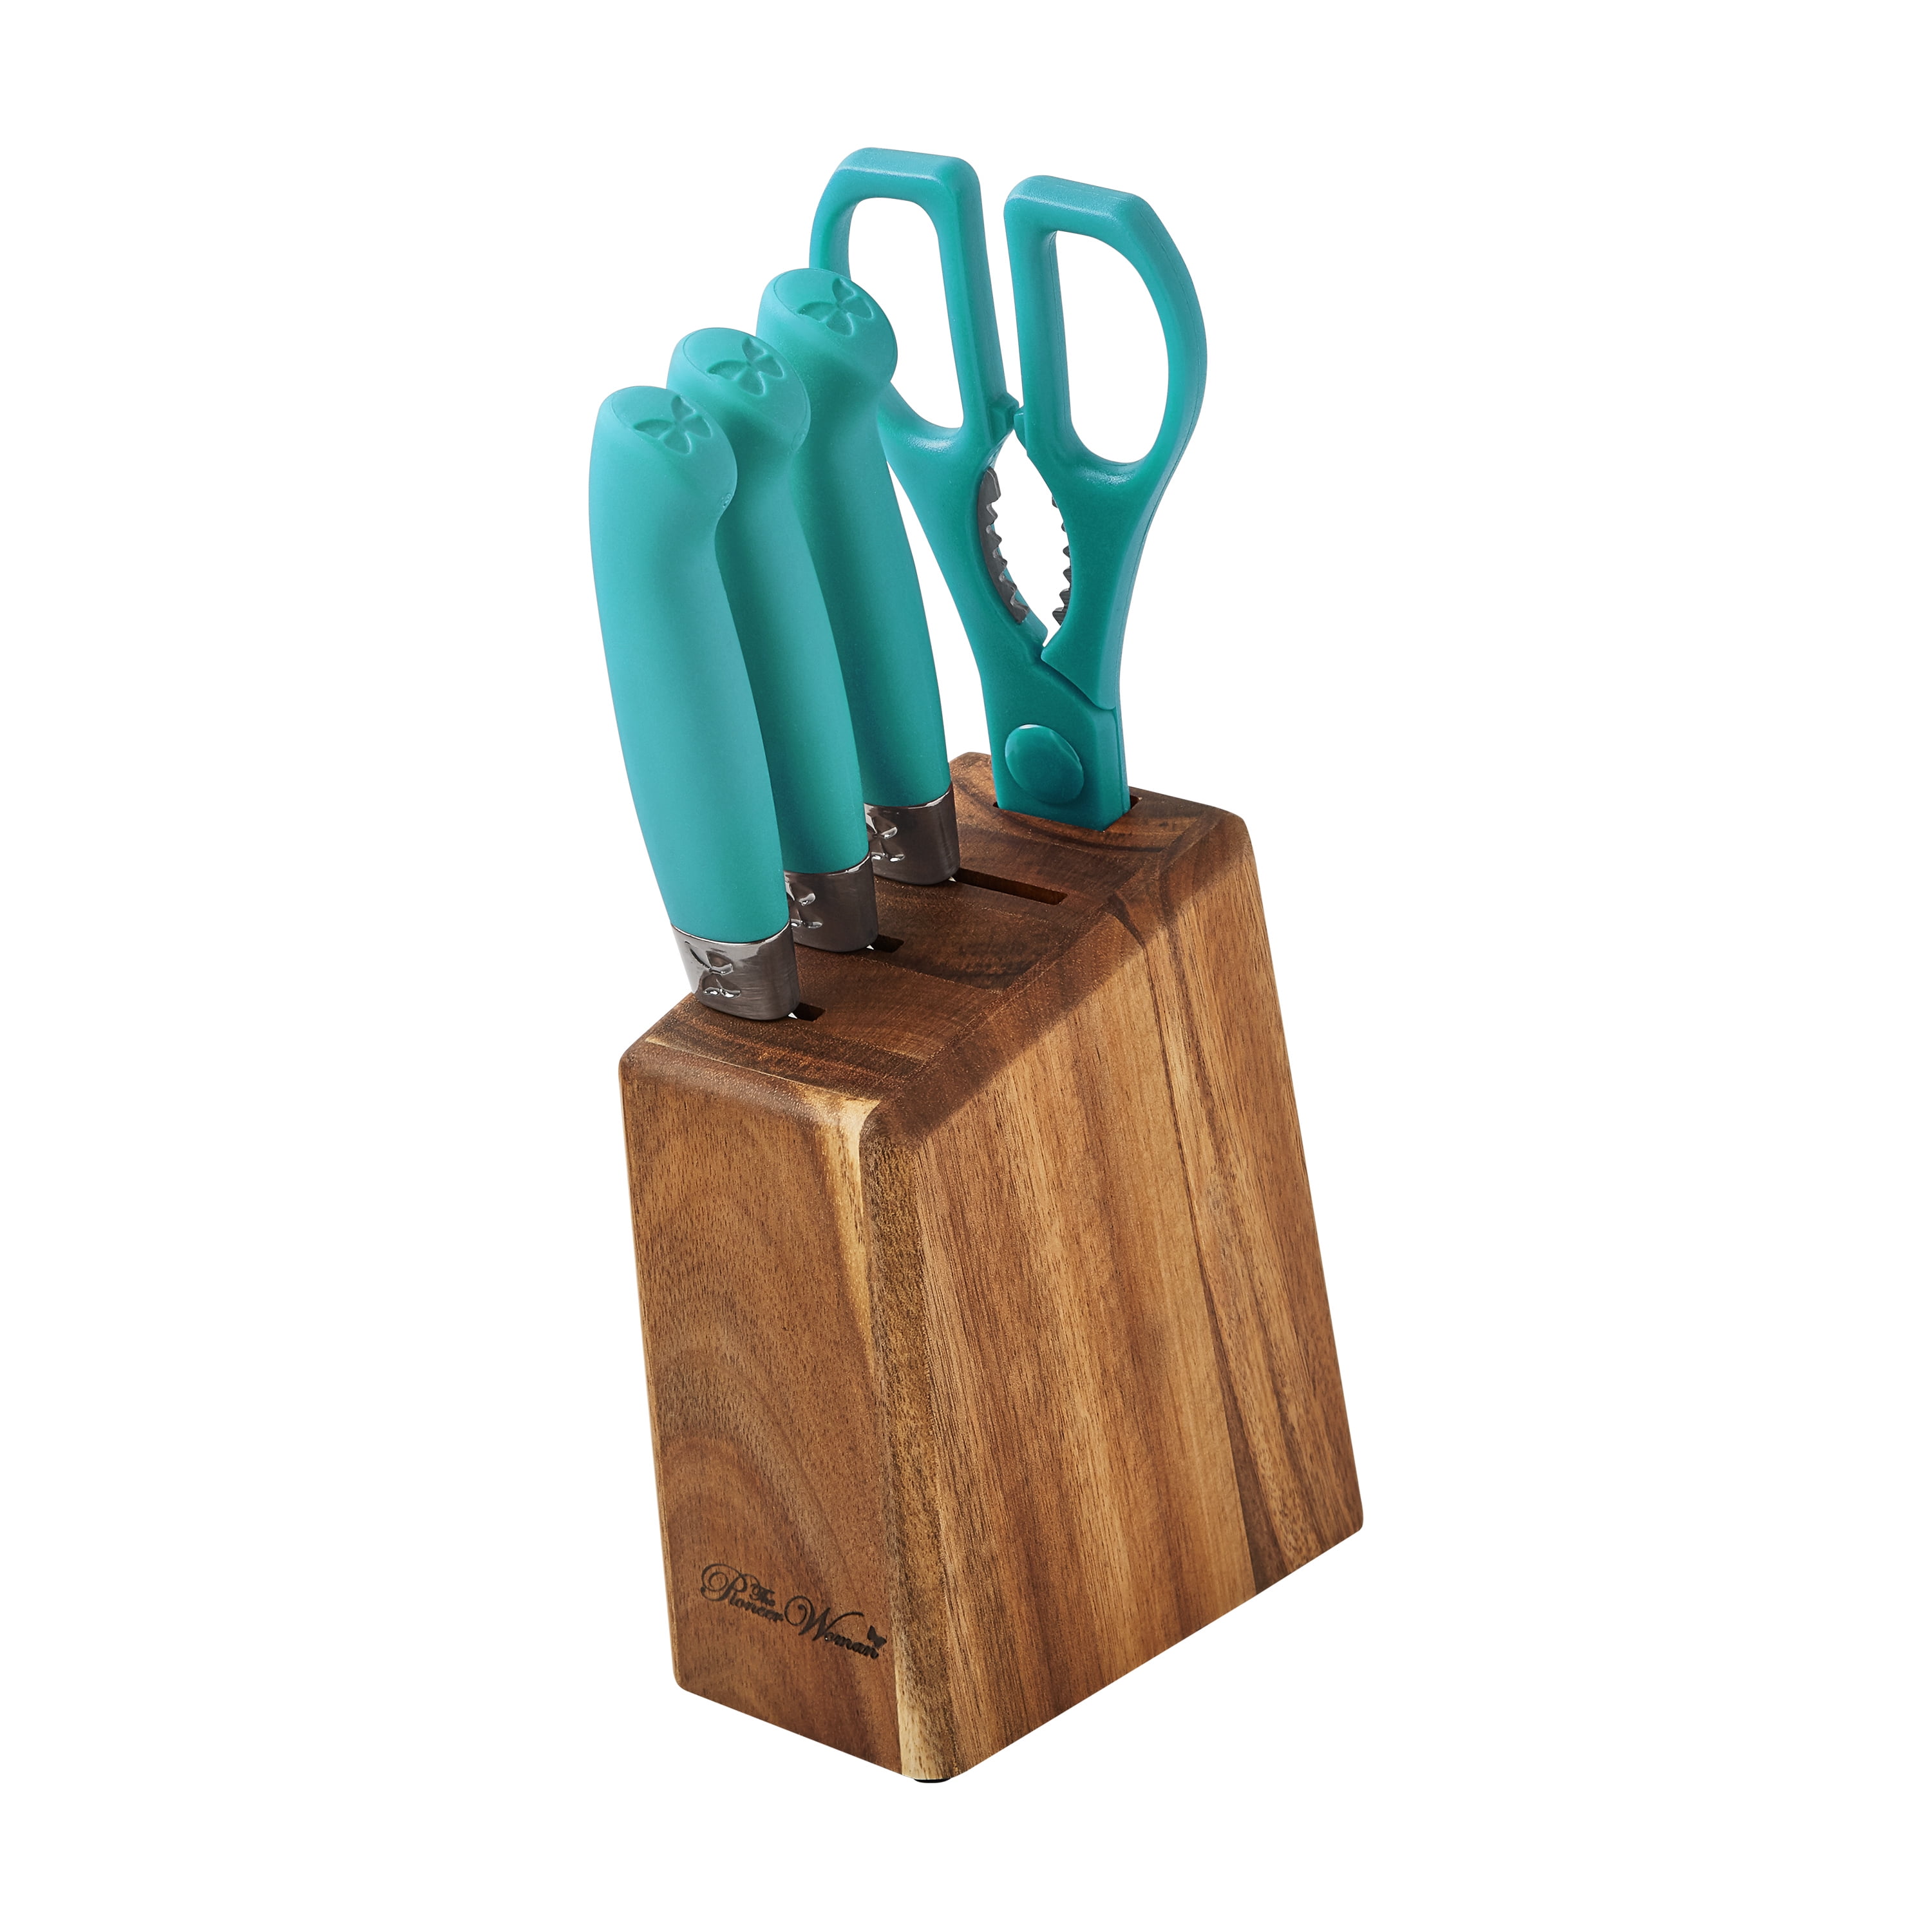 The Pioneer Woman 11-Piece Stainless Steel Knife Block Set, Teal Speckle, Size: 11 Piece